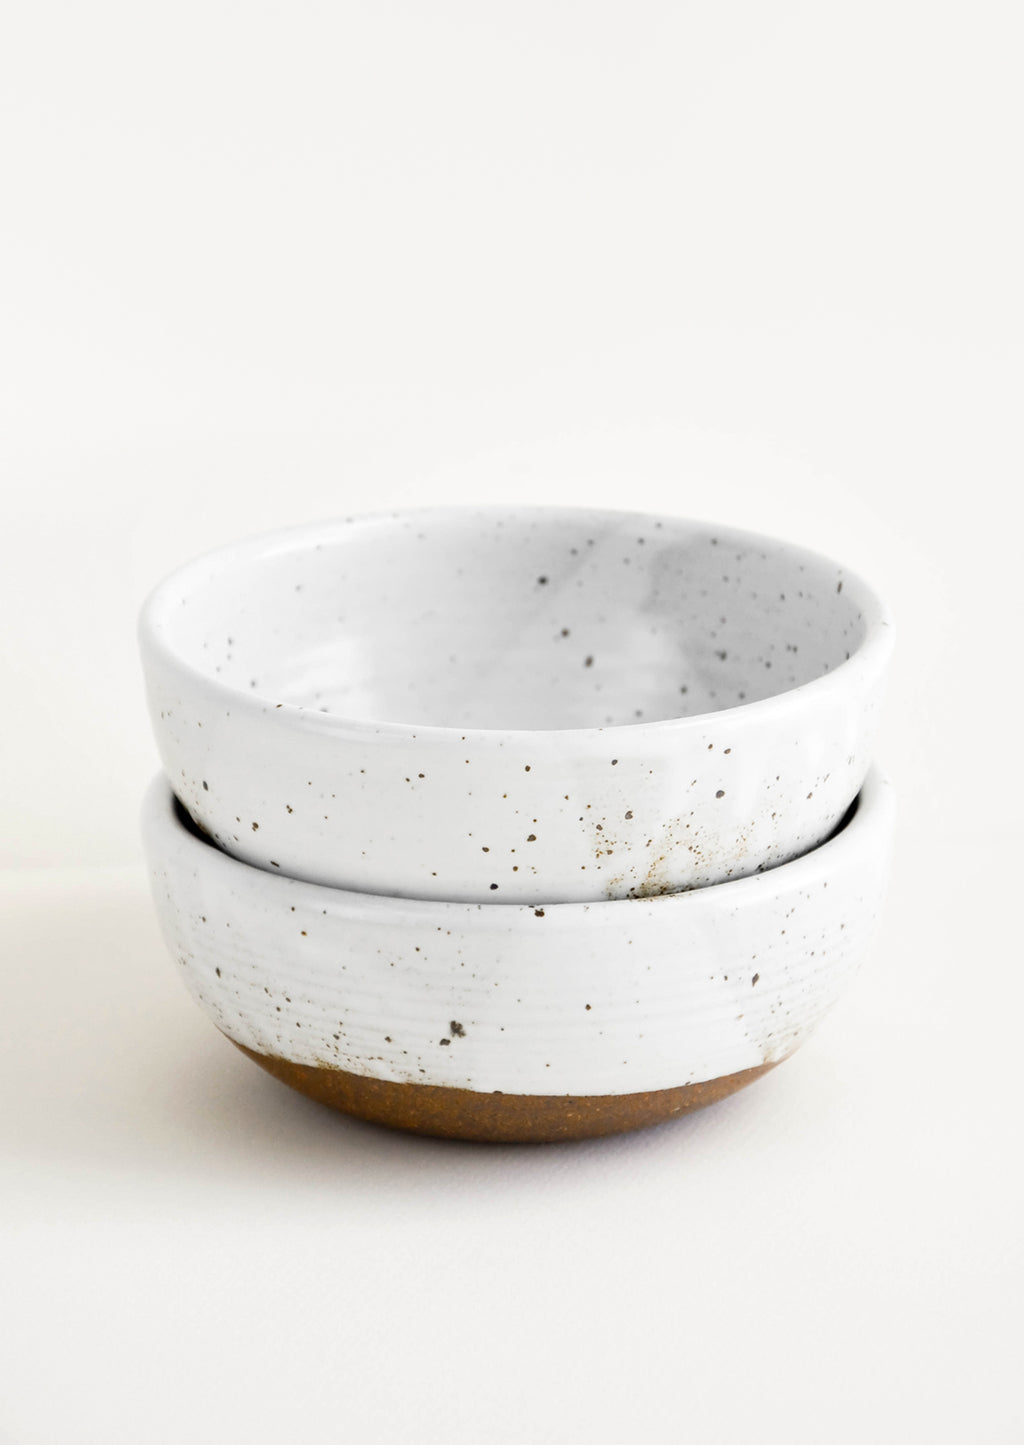 Glossy White / Soup: Two stacked white ceramic bowls with brown speckles.